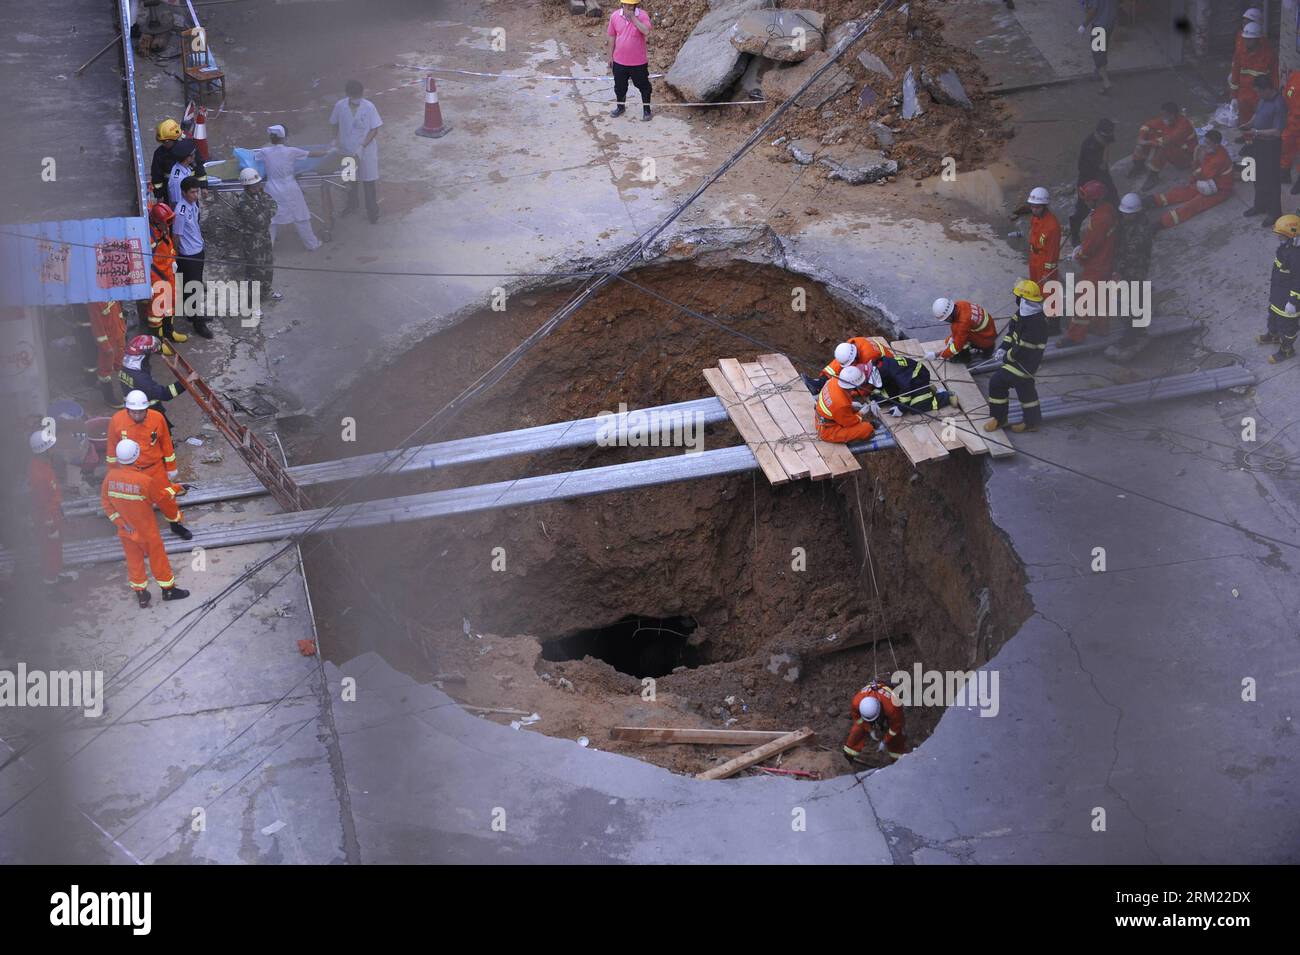 Bildnummer: 59672805 Datum: 21.05.2013 Copyright: imago/Xinhua (130521) --  SHENZHEN, May 21, 2013 (Xinhua) -- Rescuers work at the accident site where  a road cave-in occurred in Huamao Industrial Park in Shenzhen, south